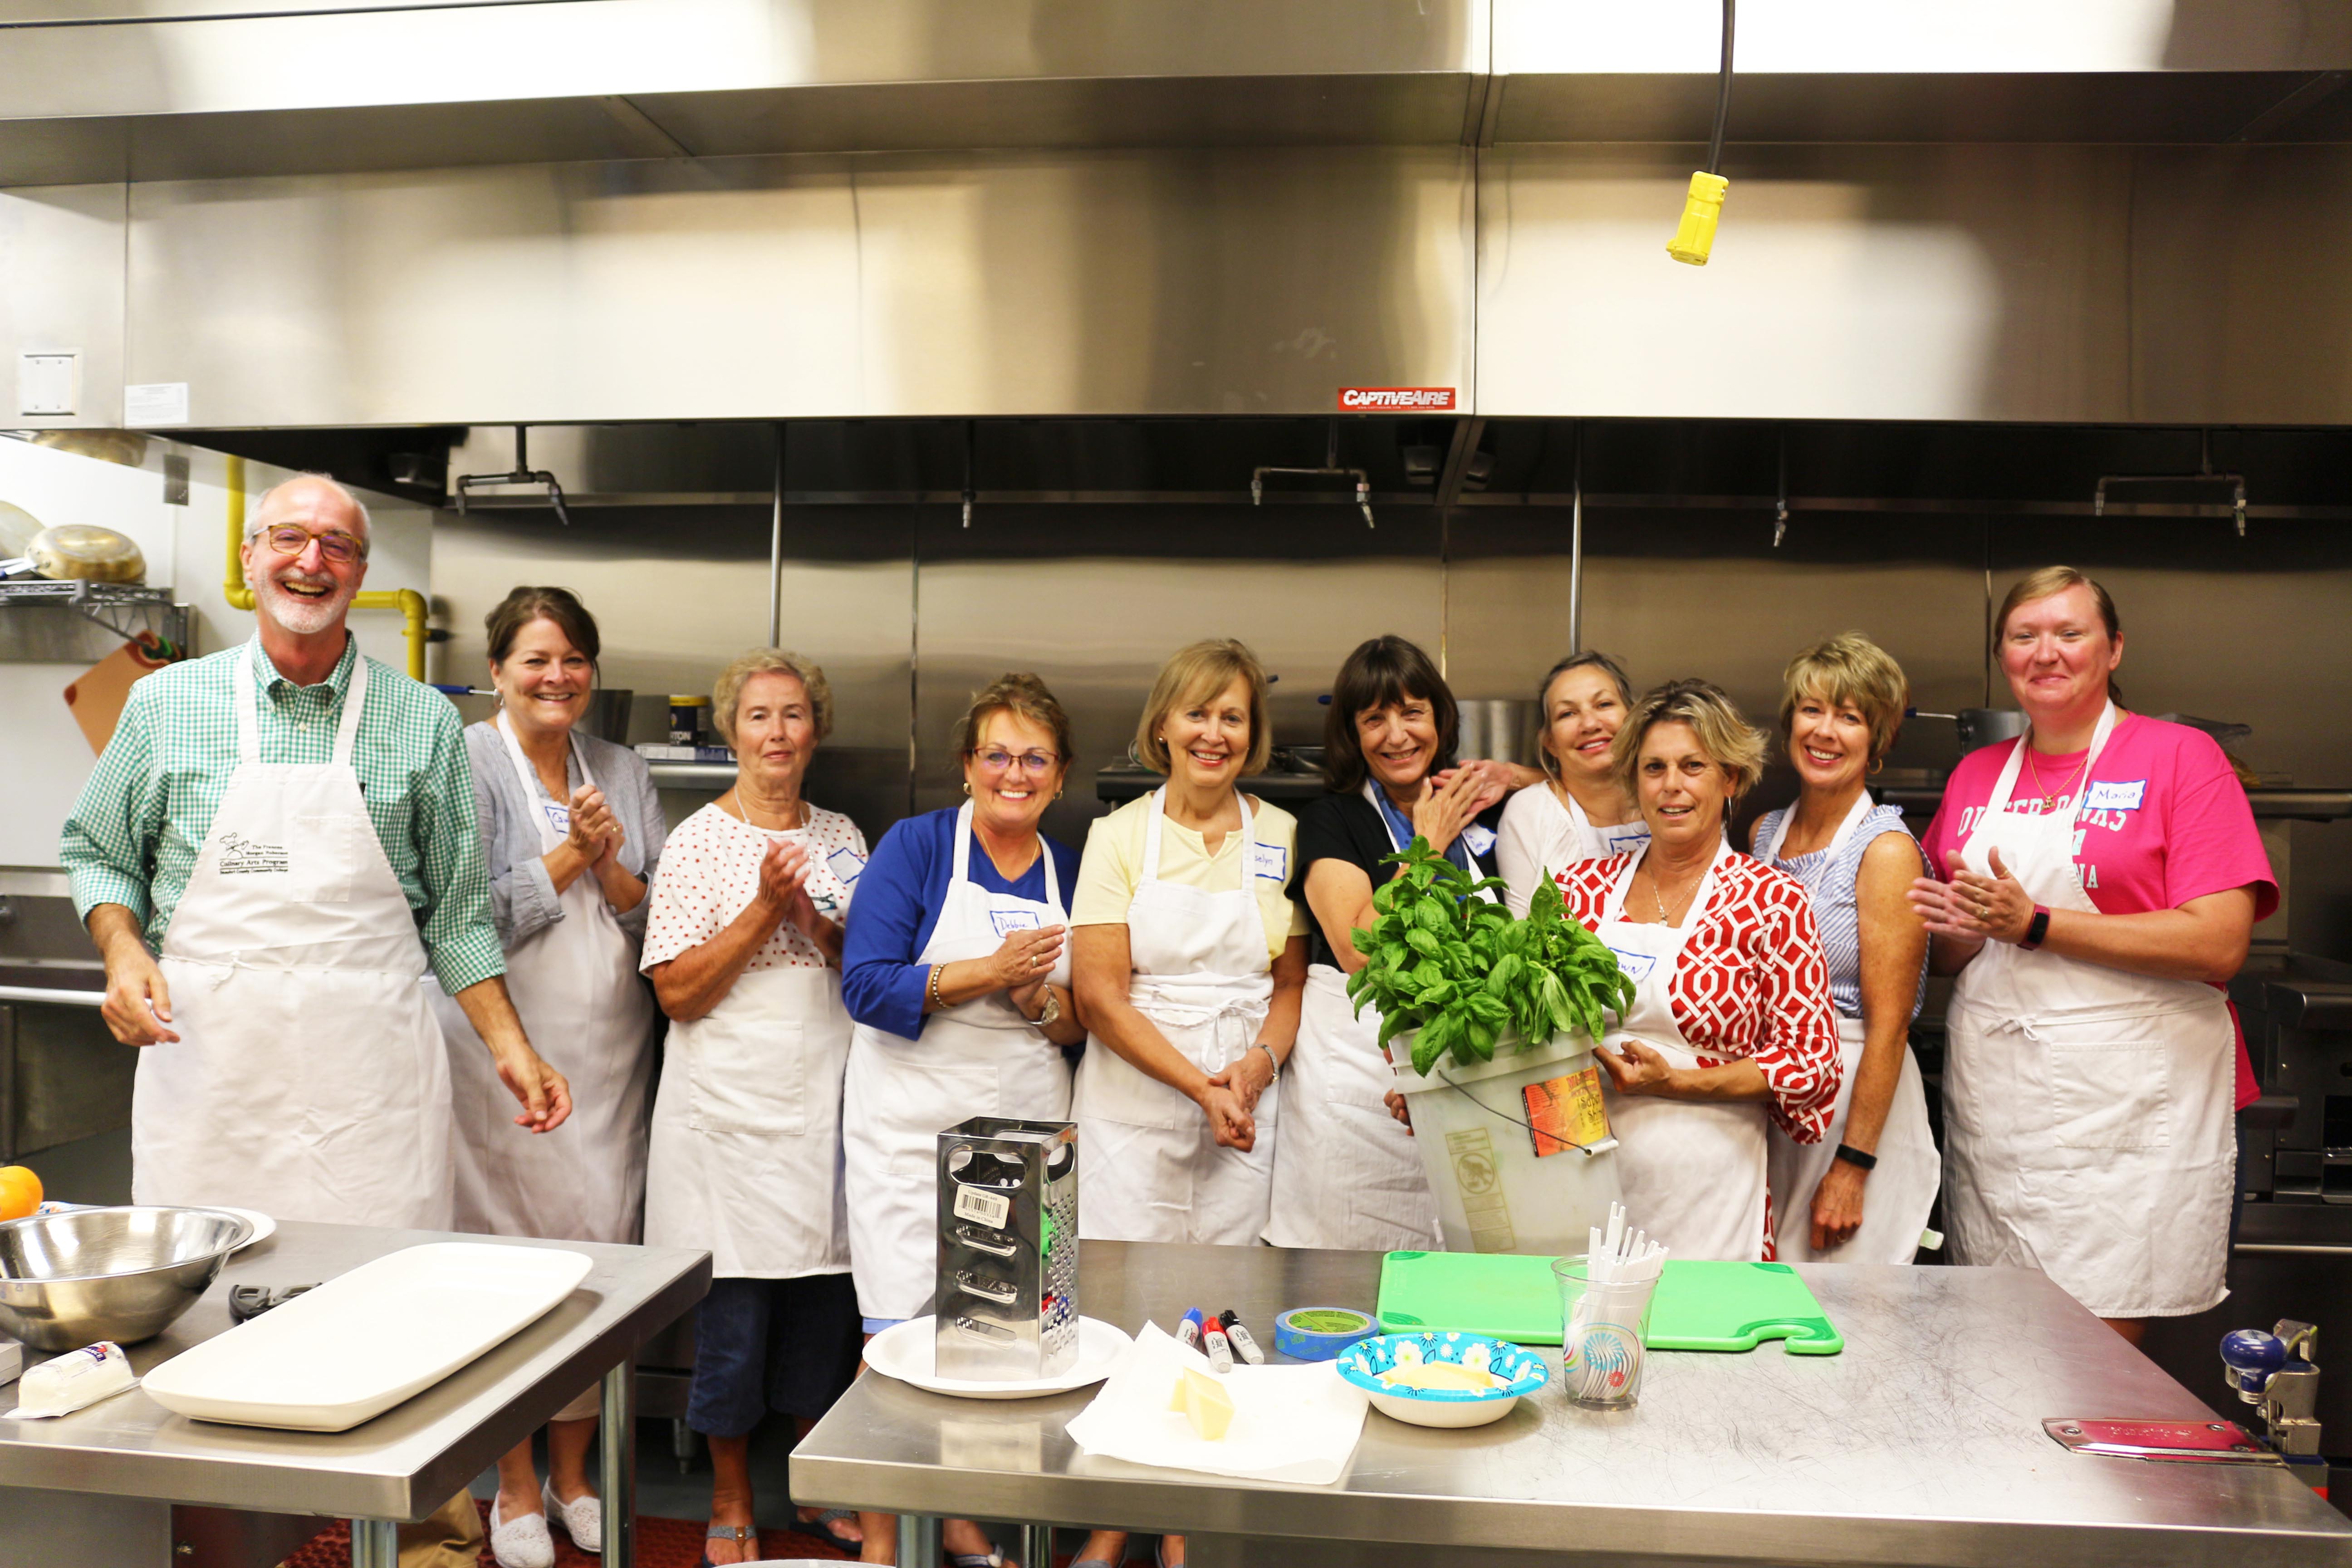 A cooking class lined up holding a bucket of basil.